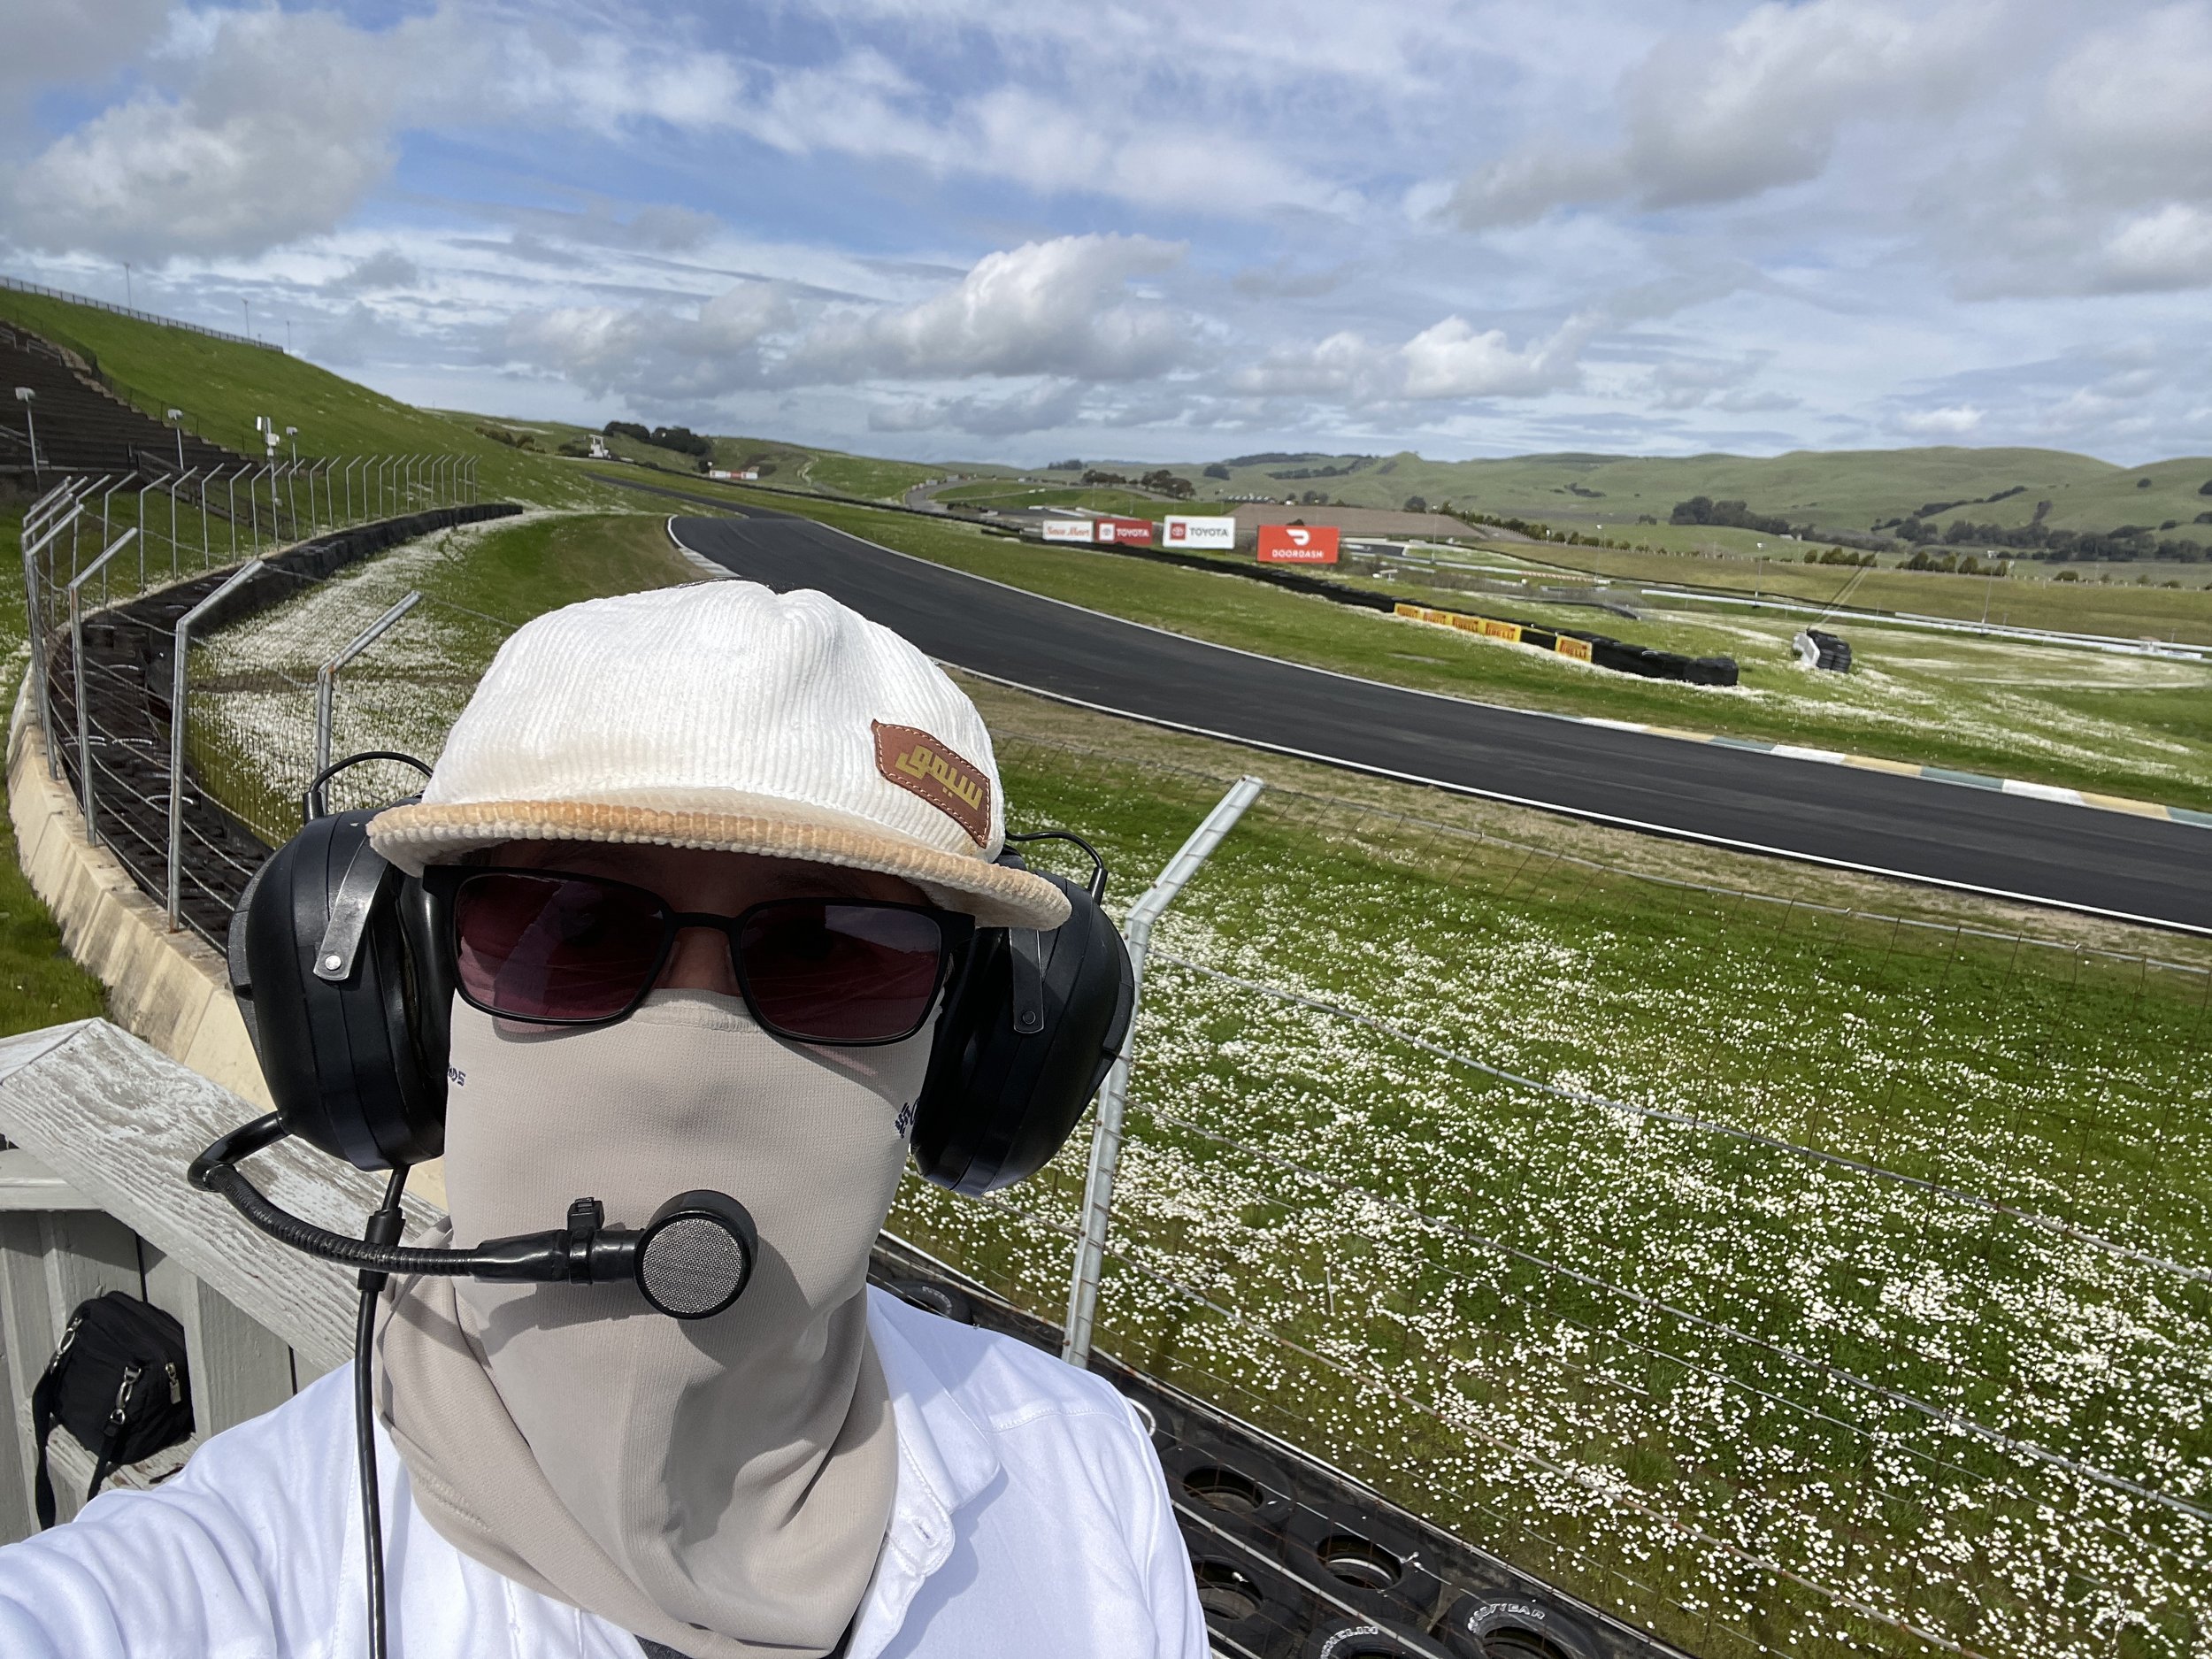 Taking my sun protection seriously up at Turn 2, Sonoma Raceway, 2024.